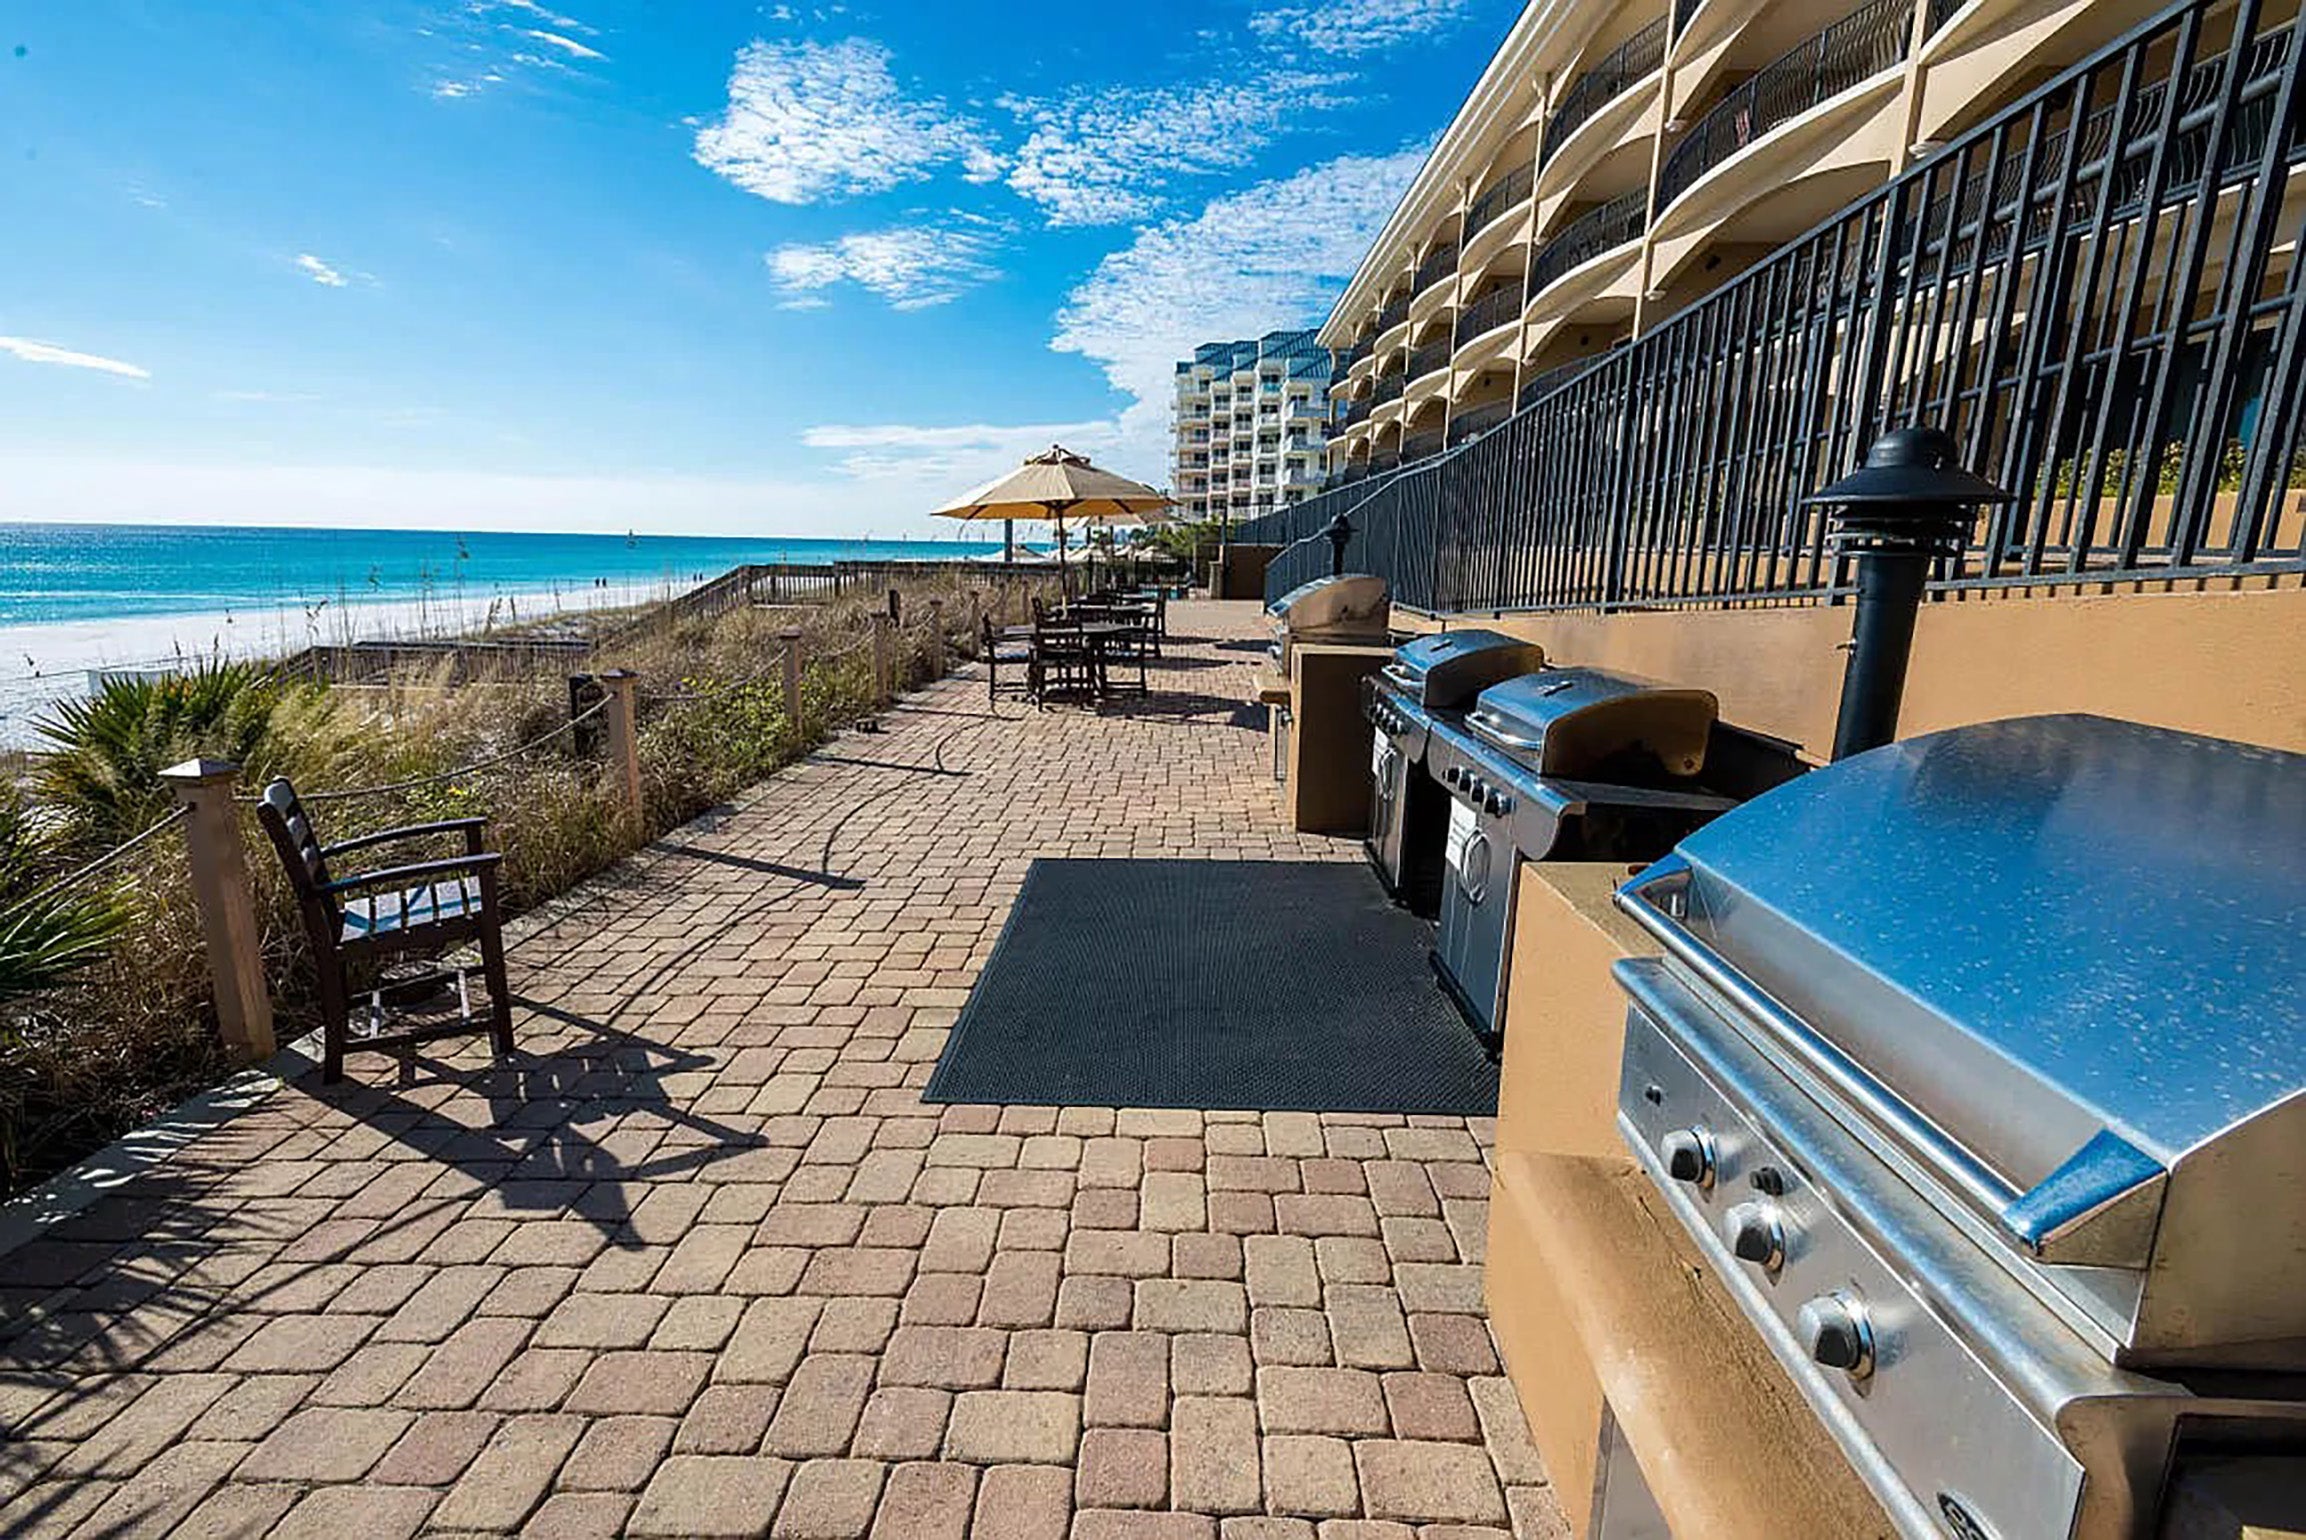 Grill out beach side